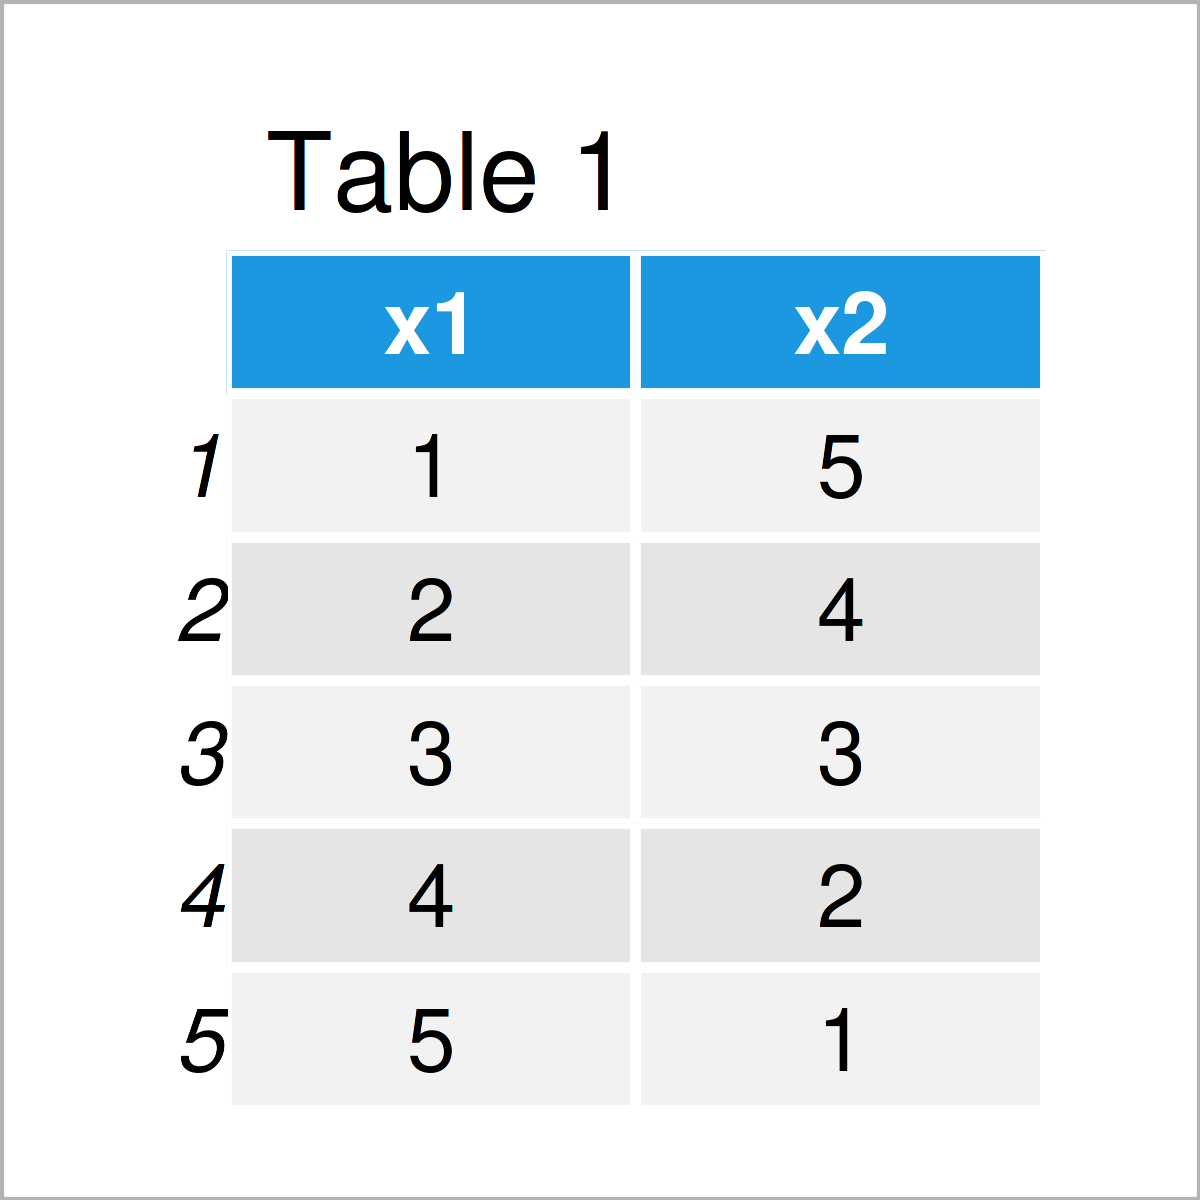 table 1 data frame hasname function